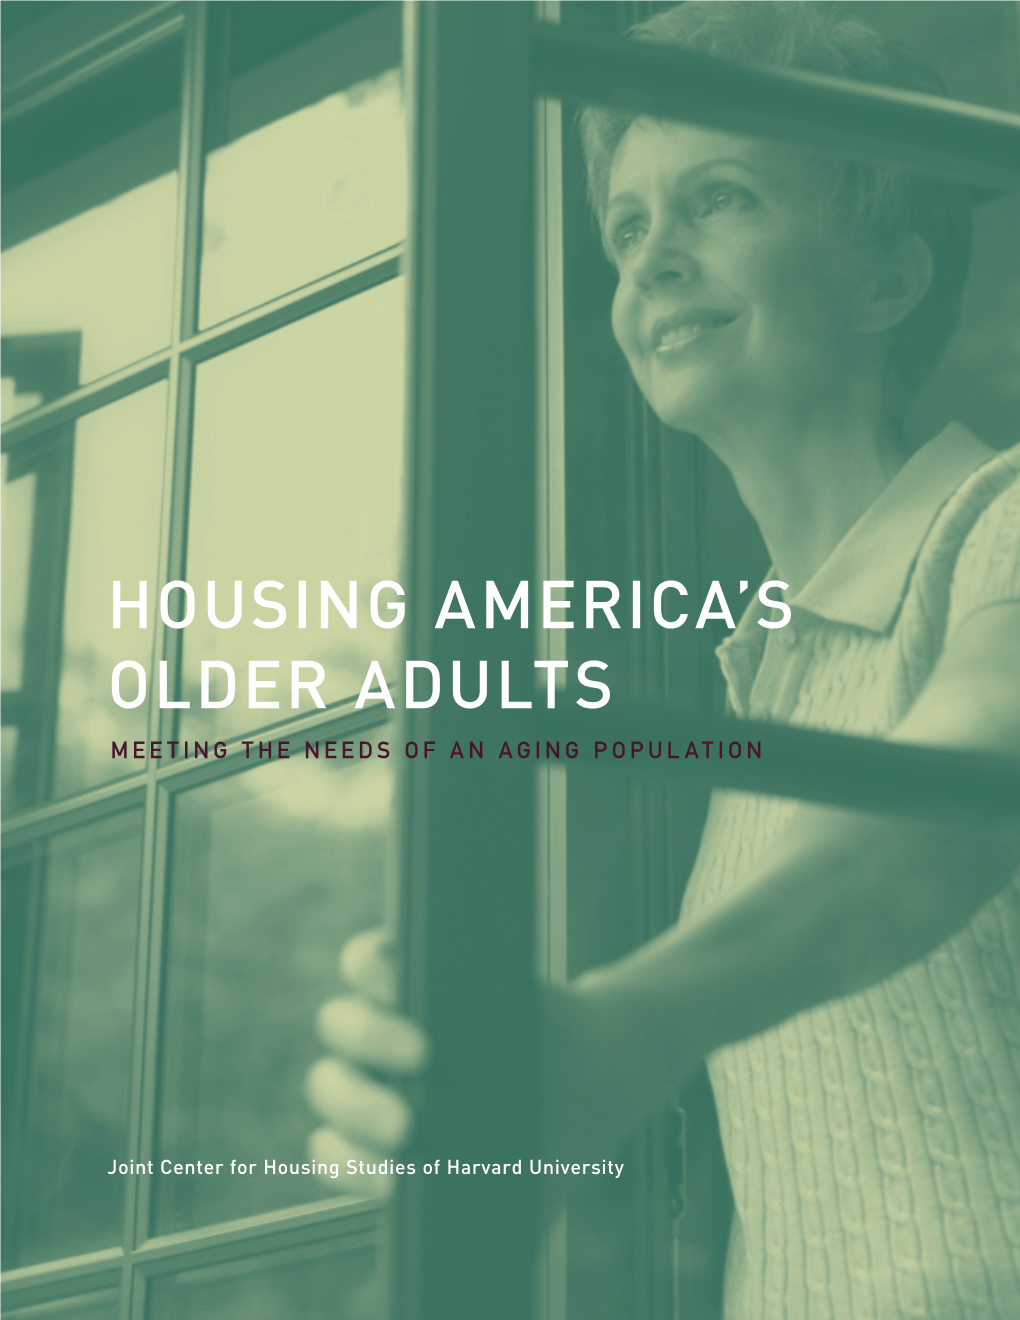 Housing America's Older Adults